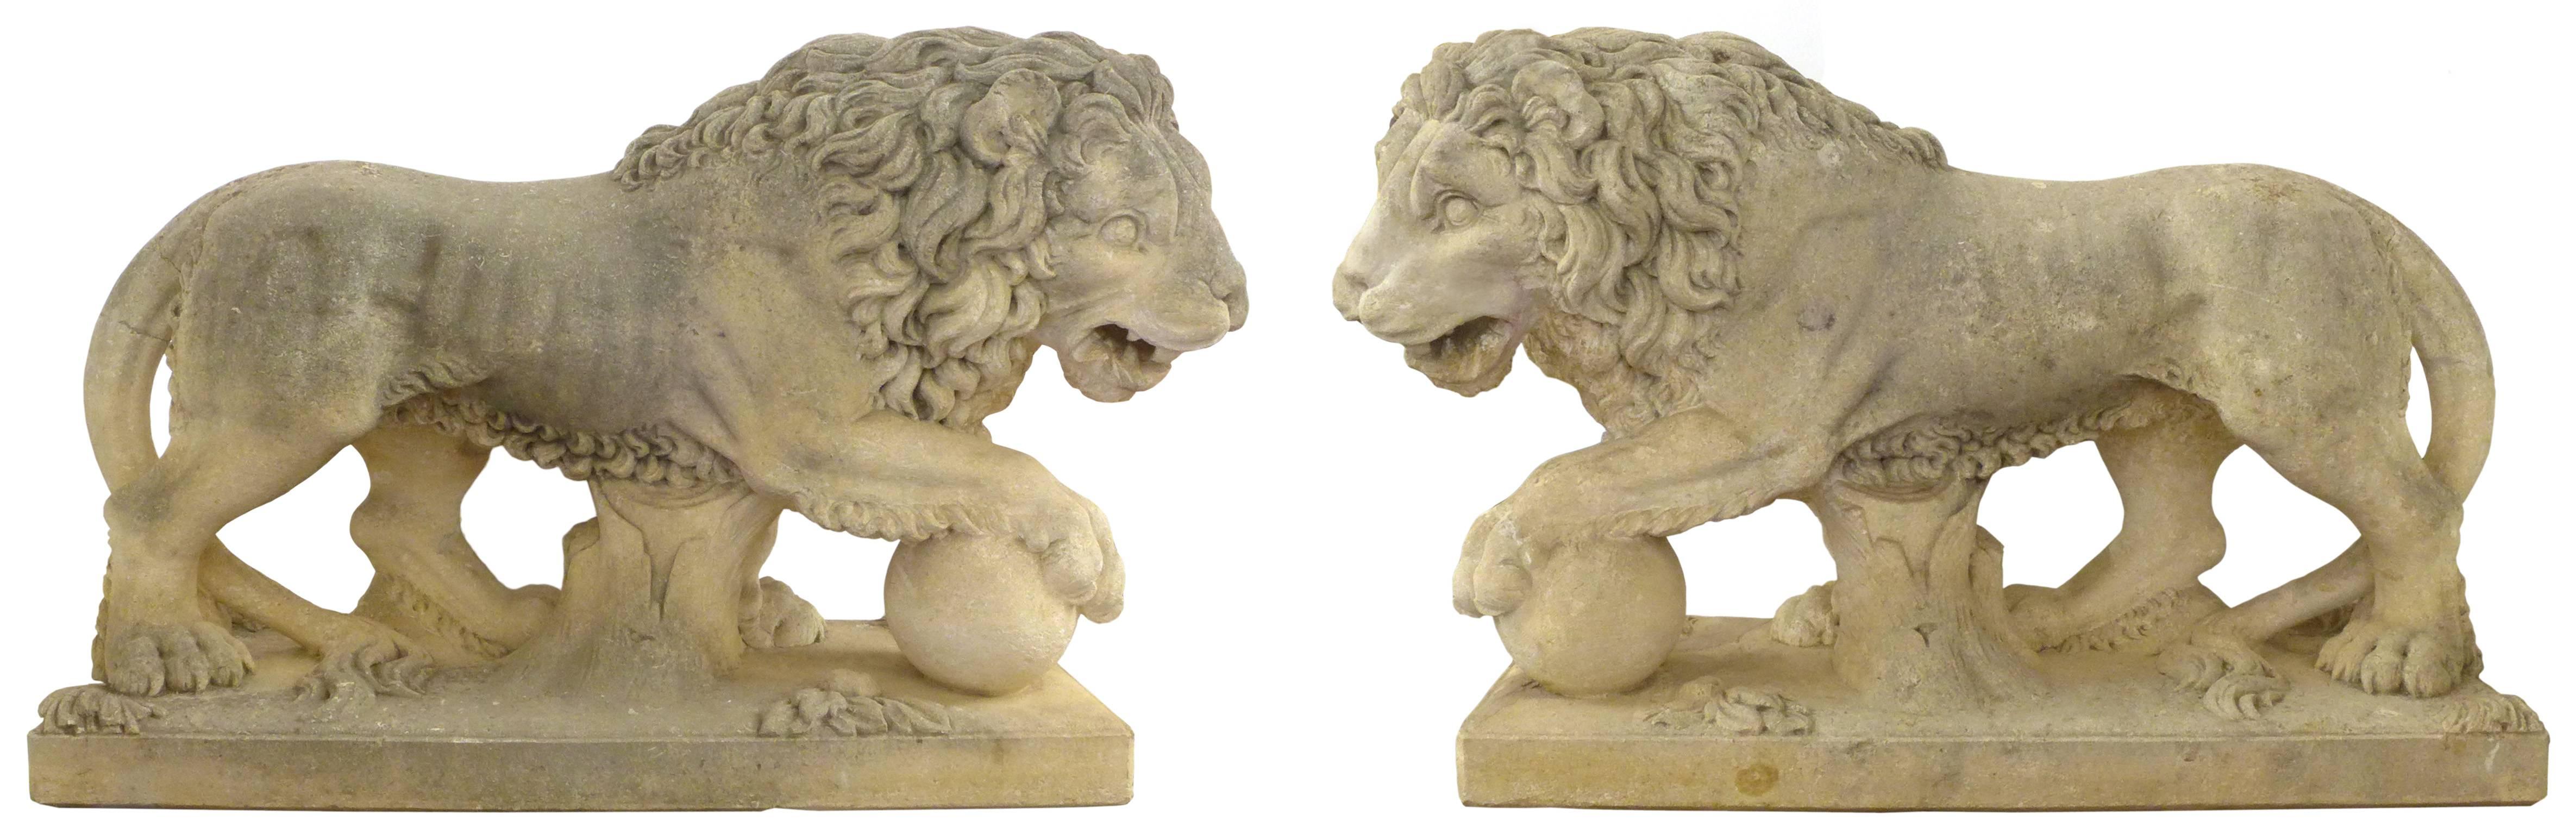 Pair of Italian Life-Sized Carved Limestone Lion Statues For Sale 1